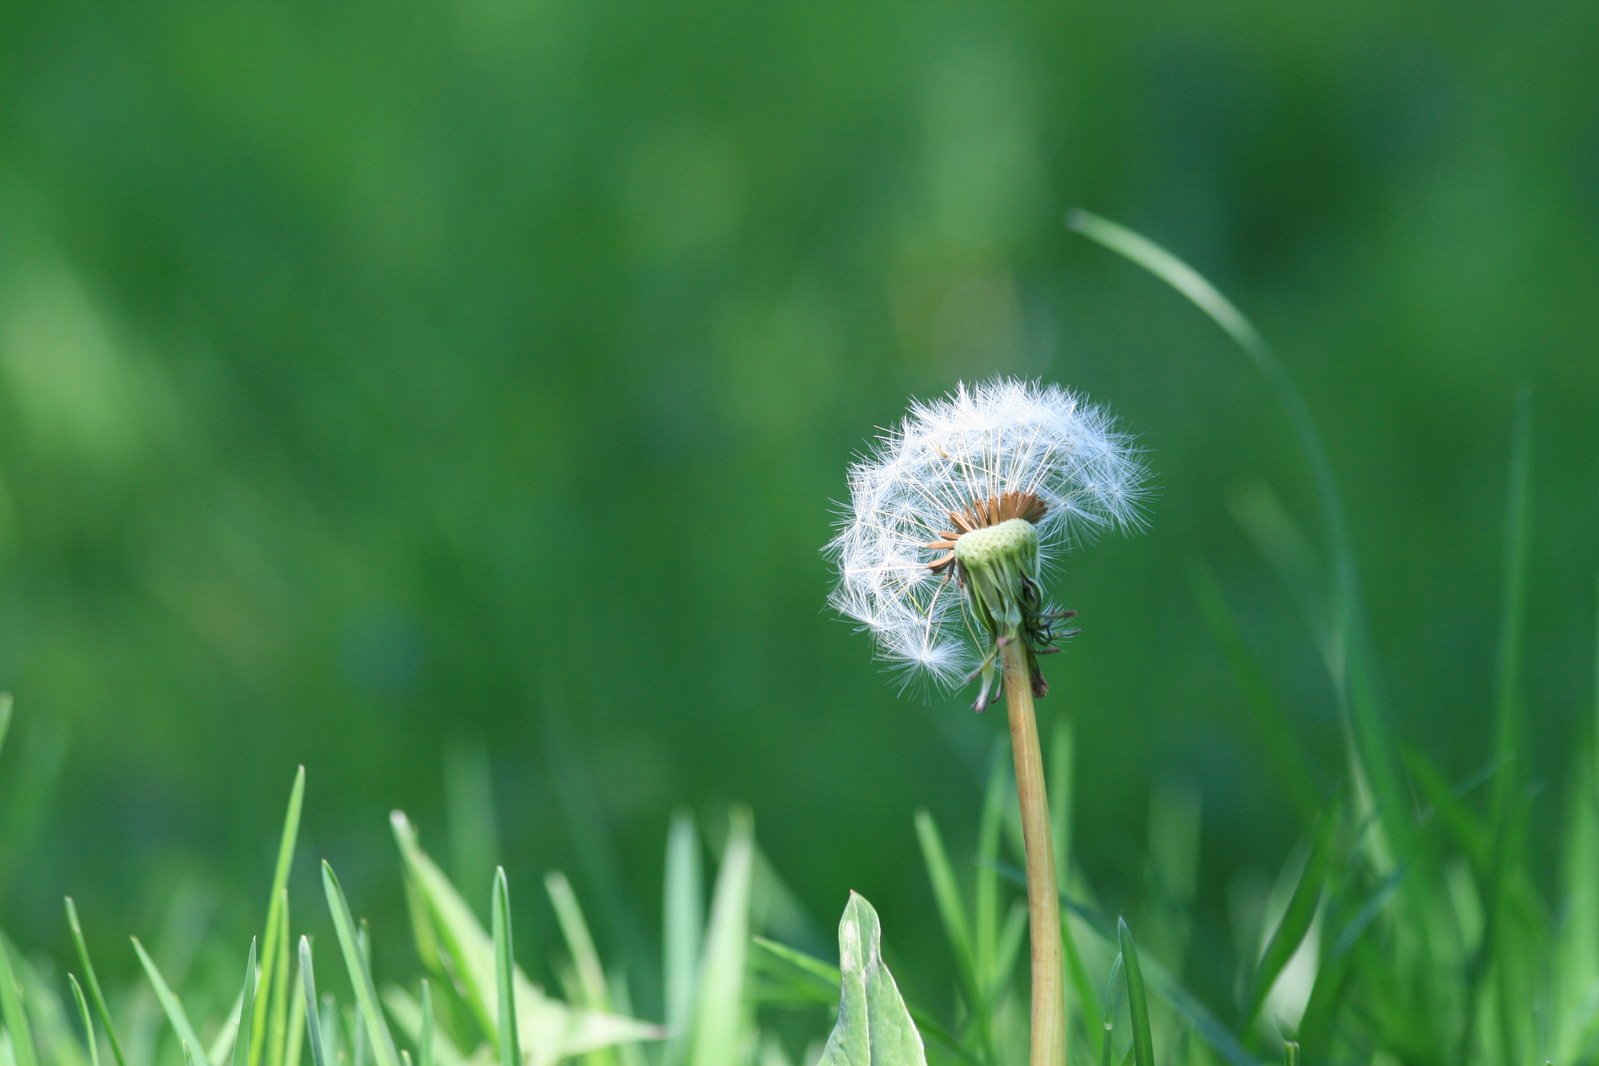 the dandelion is on top of the green grass